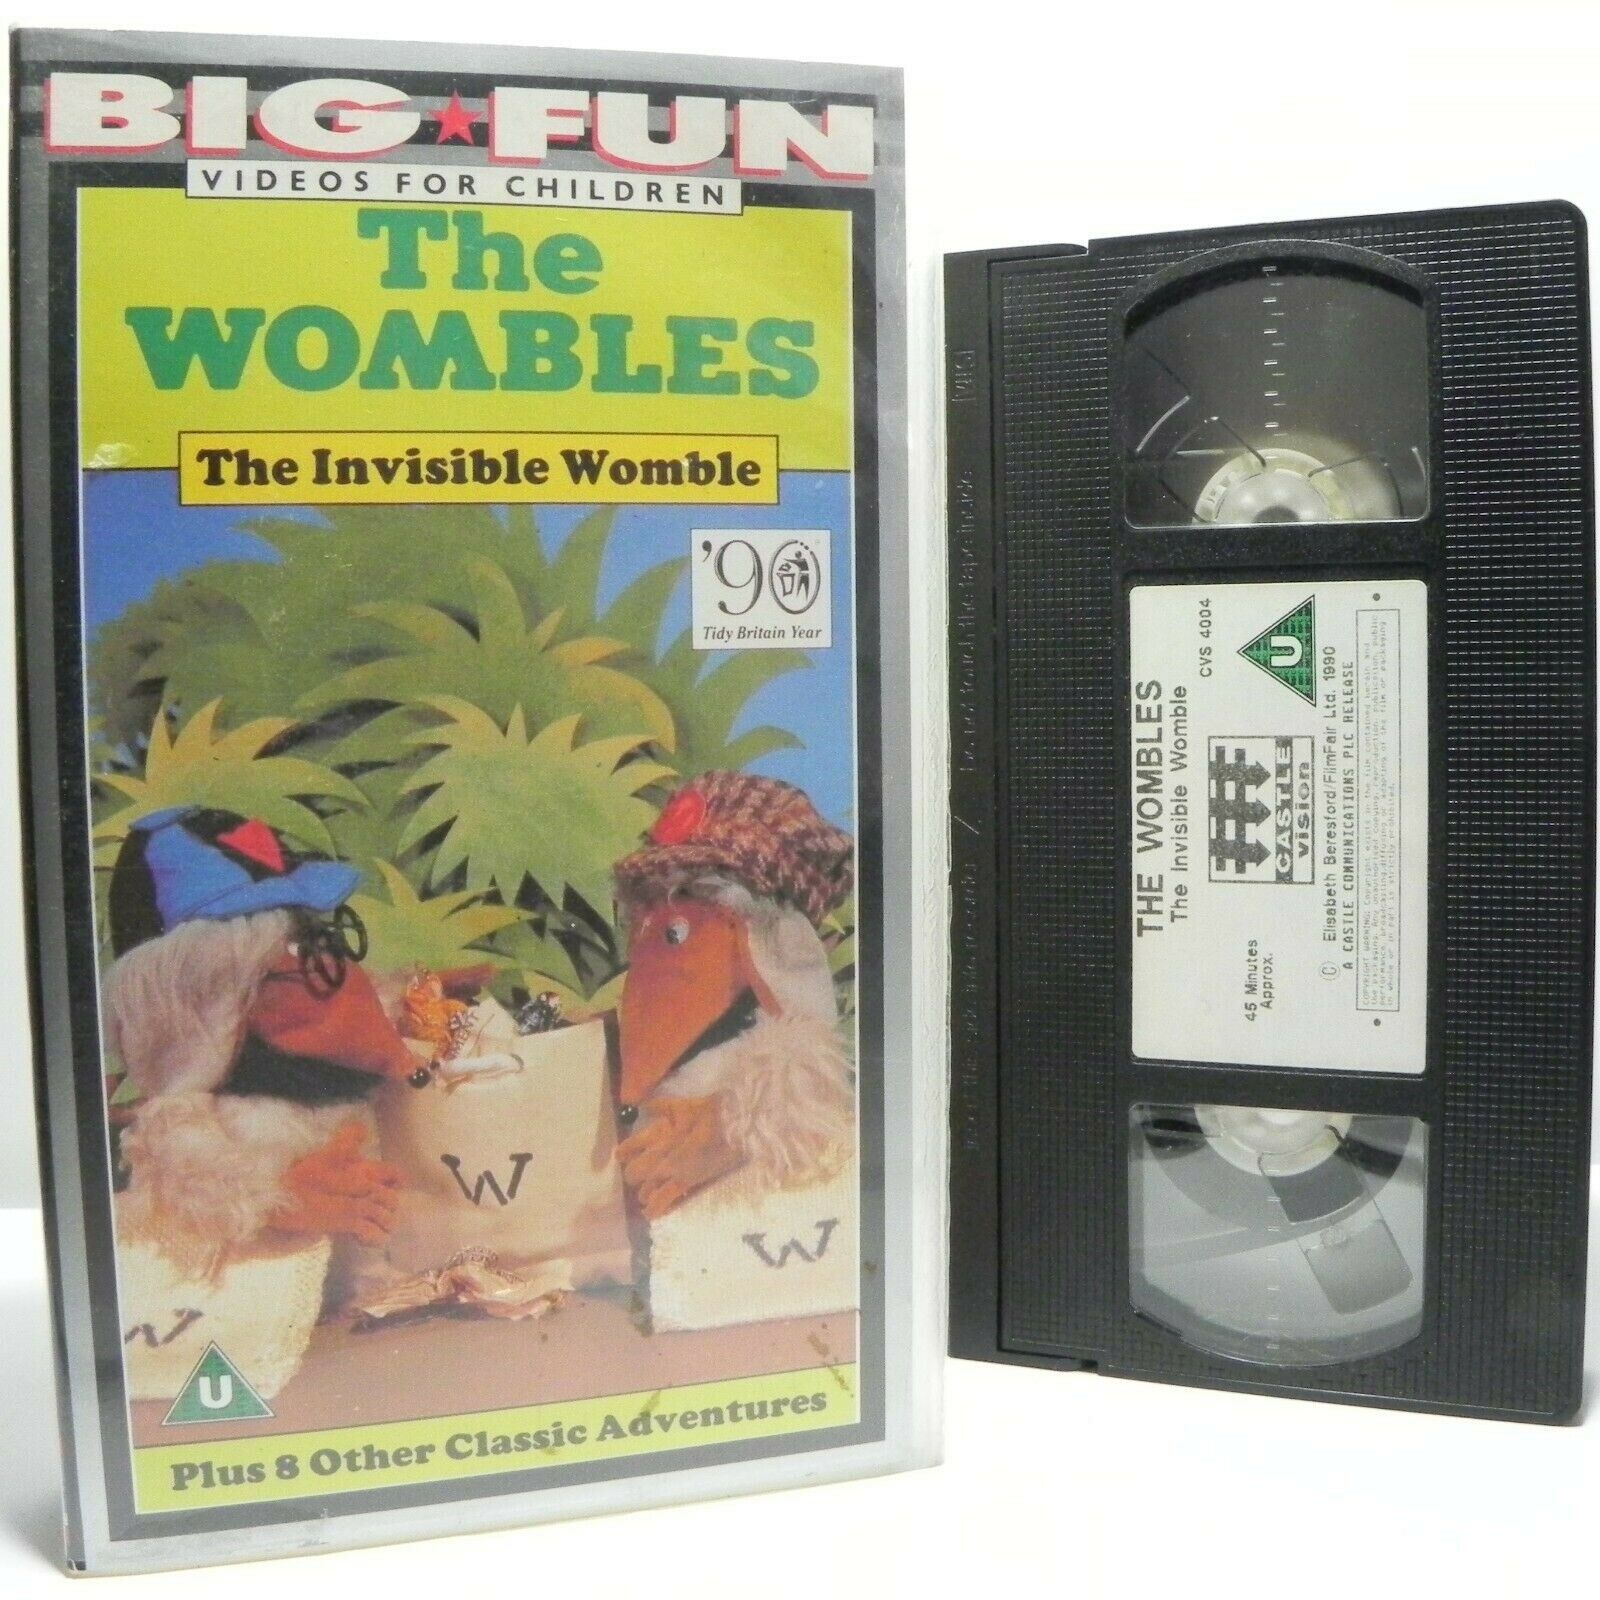 The Wombles: The Invisible Womble - Animated - Classic Adventures - Kids - VHS-